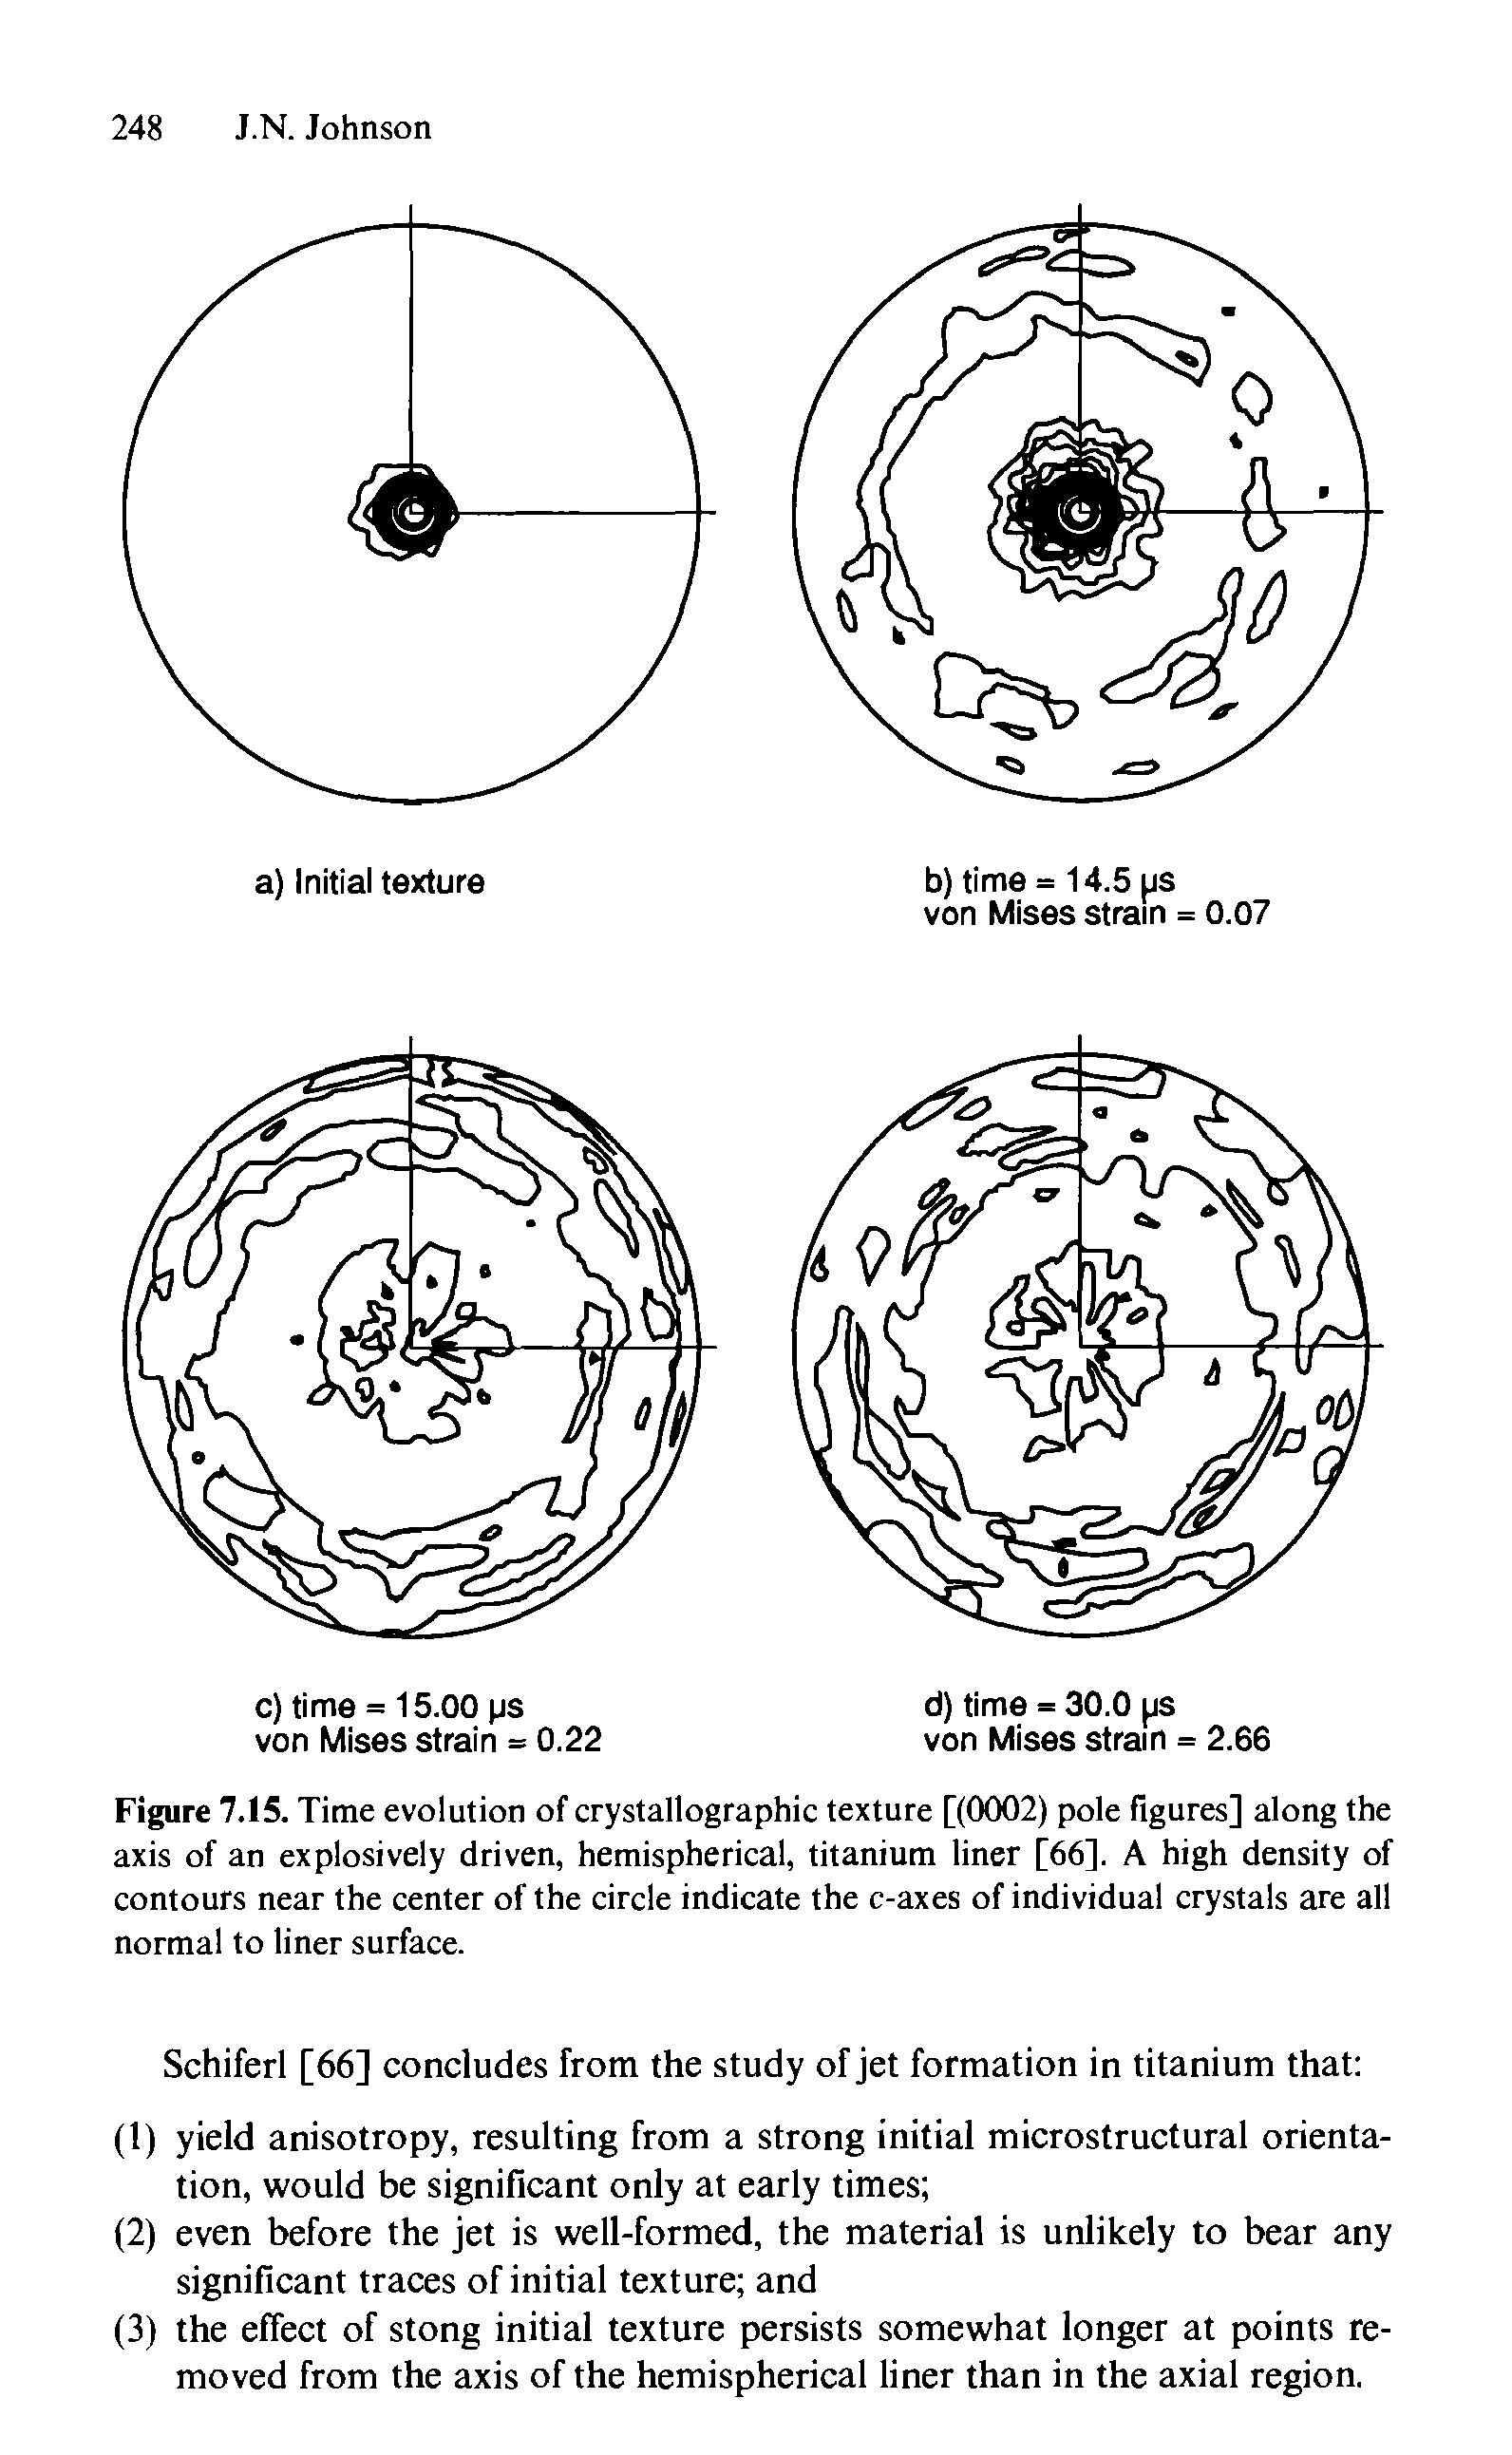 Figure 7. 5. Time evolution of crystallographic texture [(0002) pole figures] along the axis of an explosively driven, hemispherical, titanium liner [66]. A high density of contours near the center of the circle indicate the c-axes of individual crystals are all normal to liner surface.